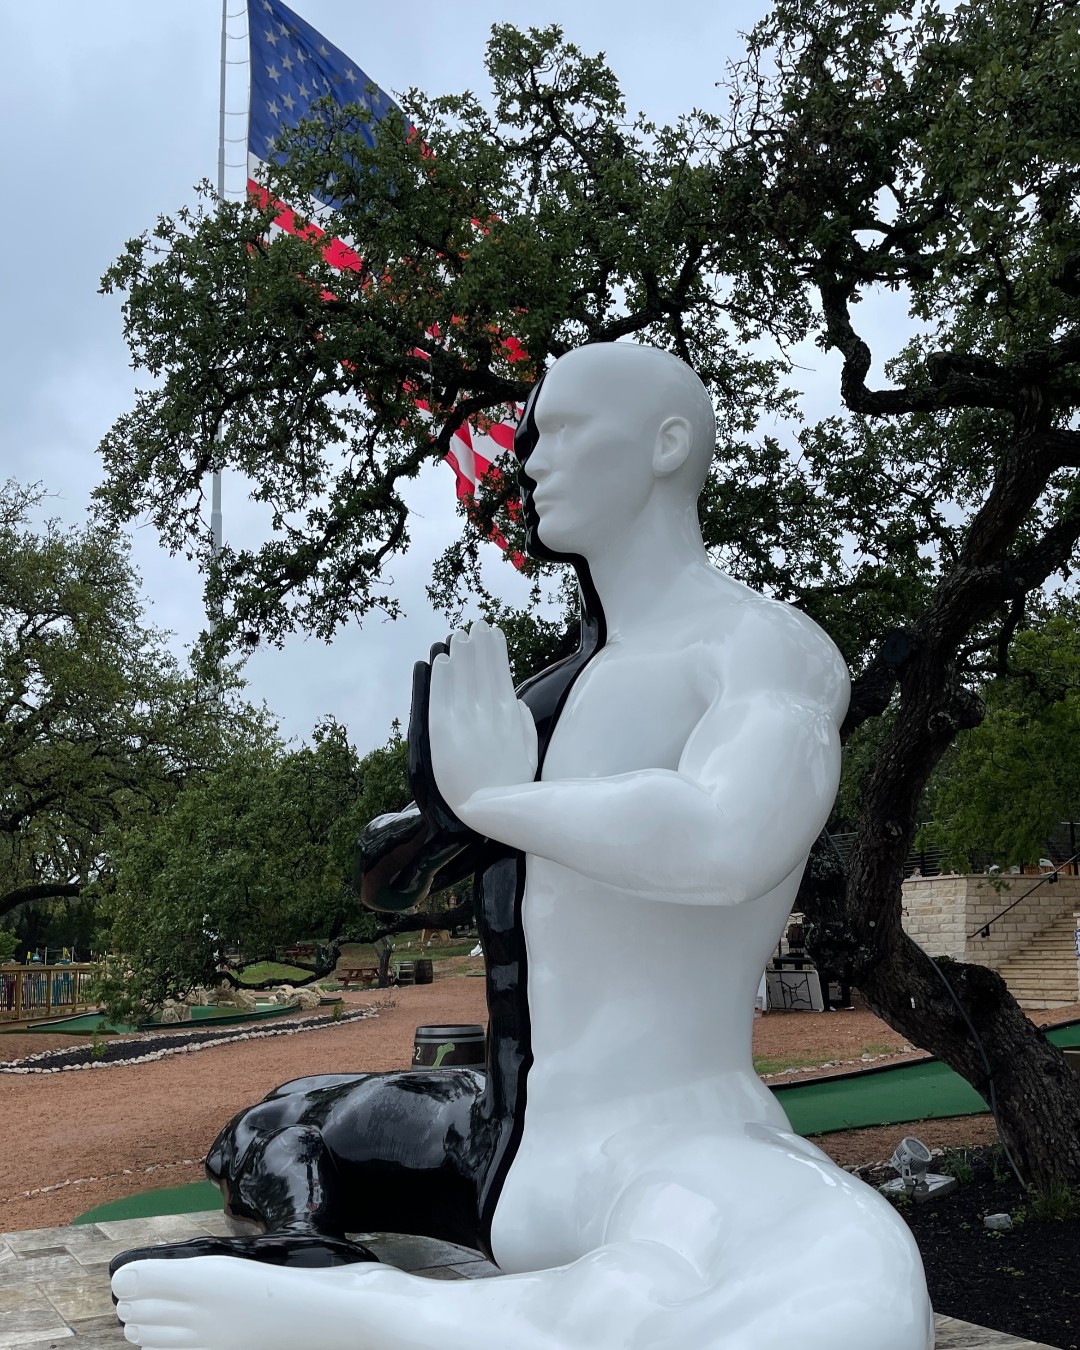 Dreamland Dripping Springs Due To The Inclement Weather We Ve Experienced This Morning Dreamland Will Be Closed For The Remainder Of The Day We Apologize For Any Inconvenience And Look Forward